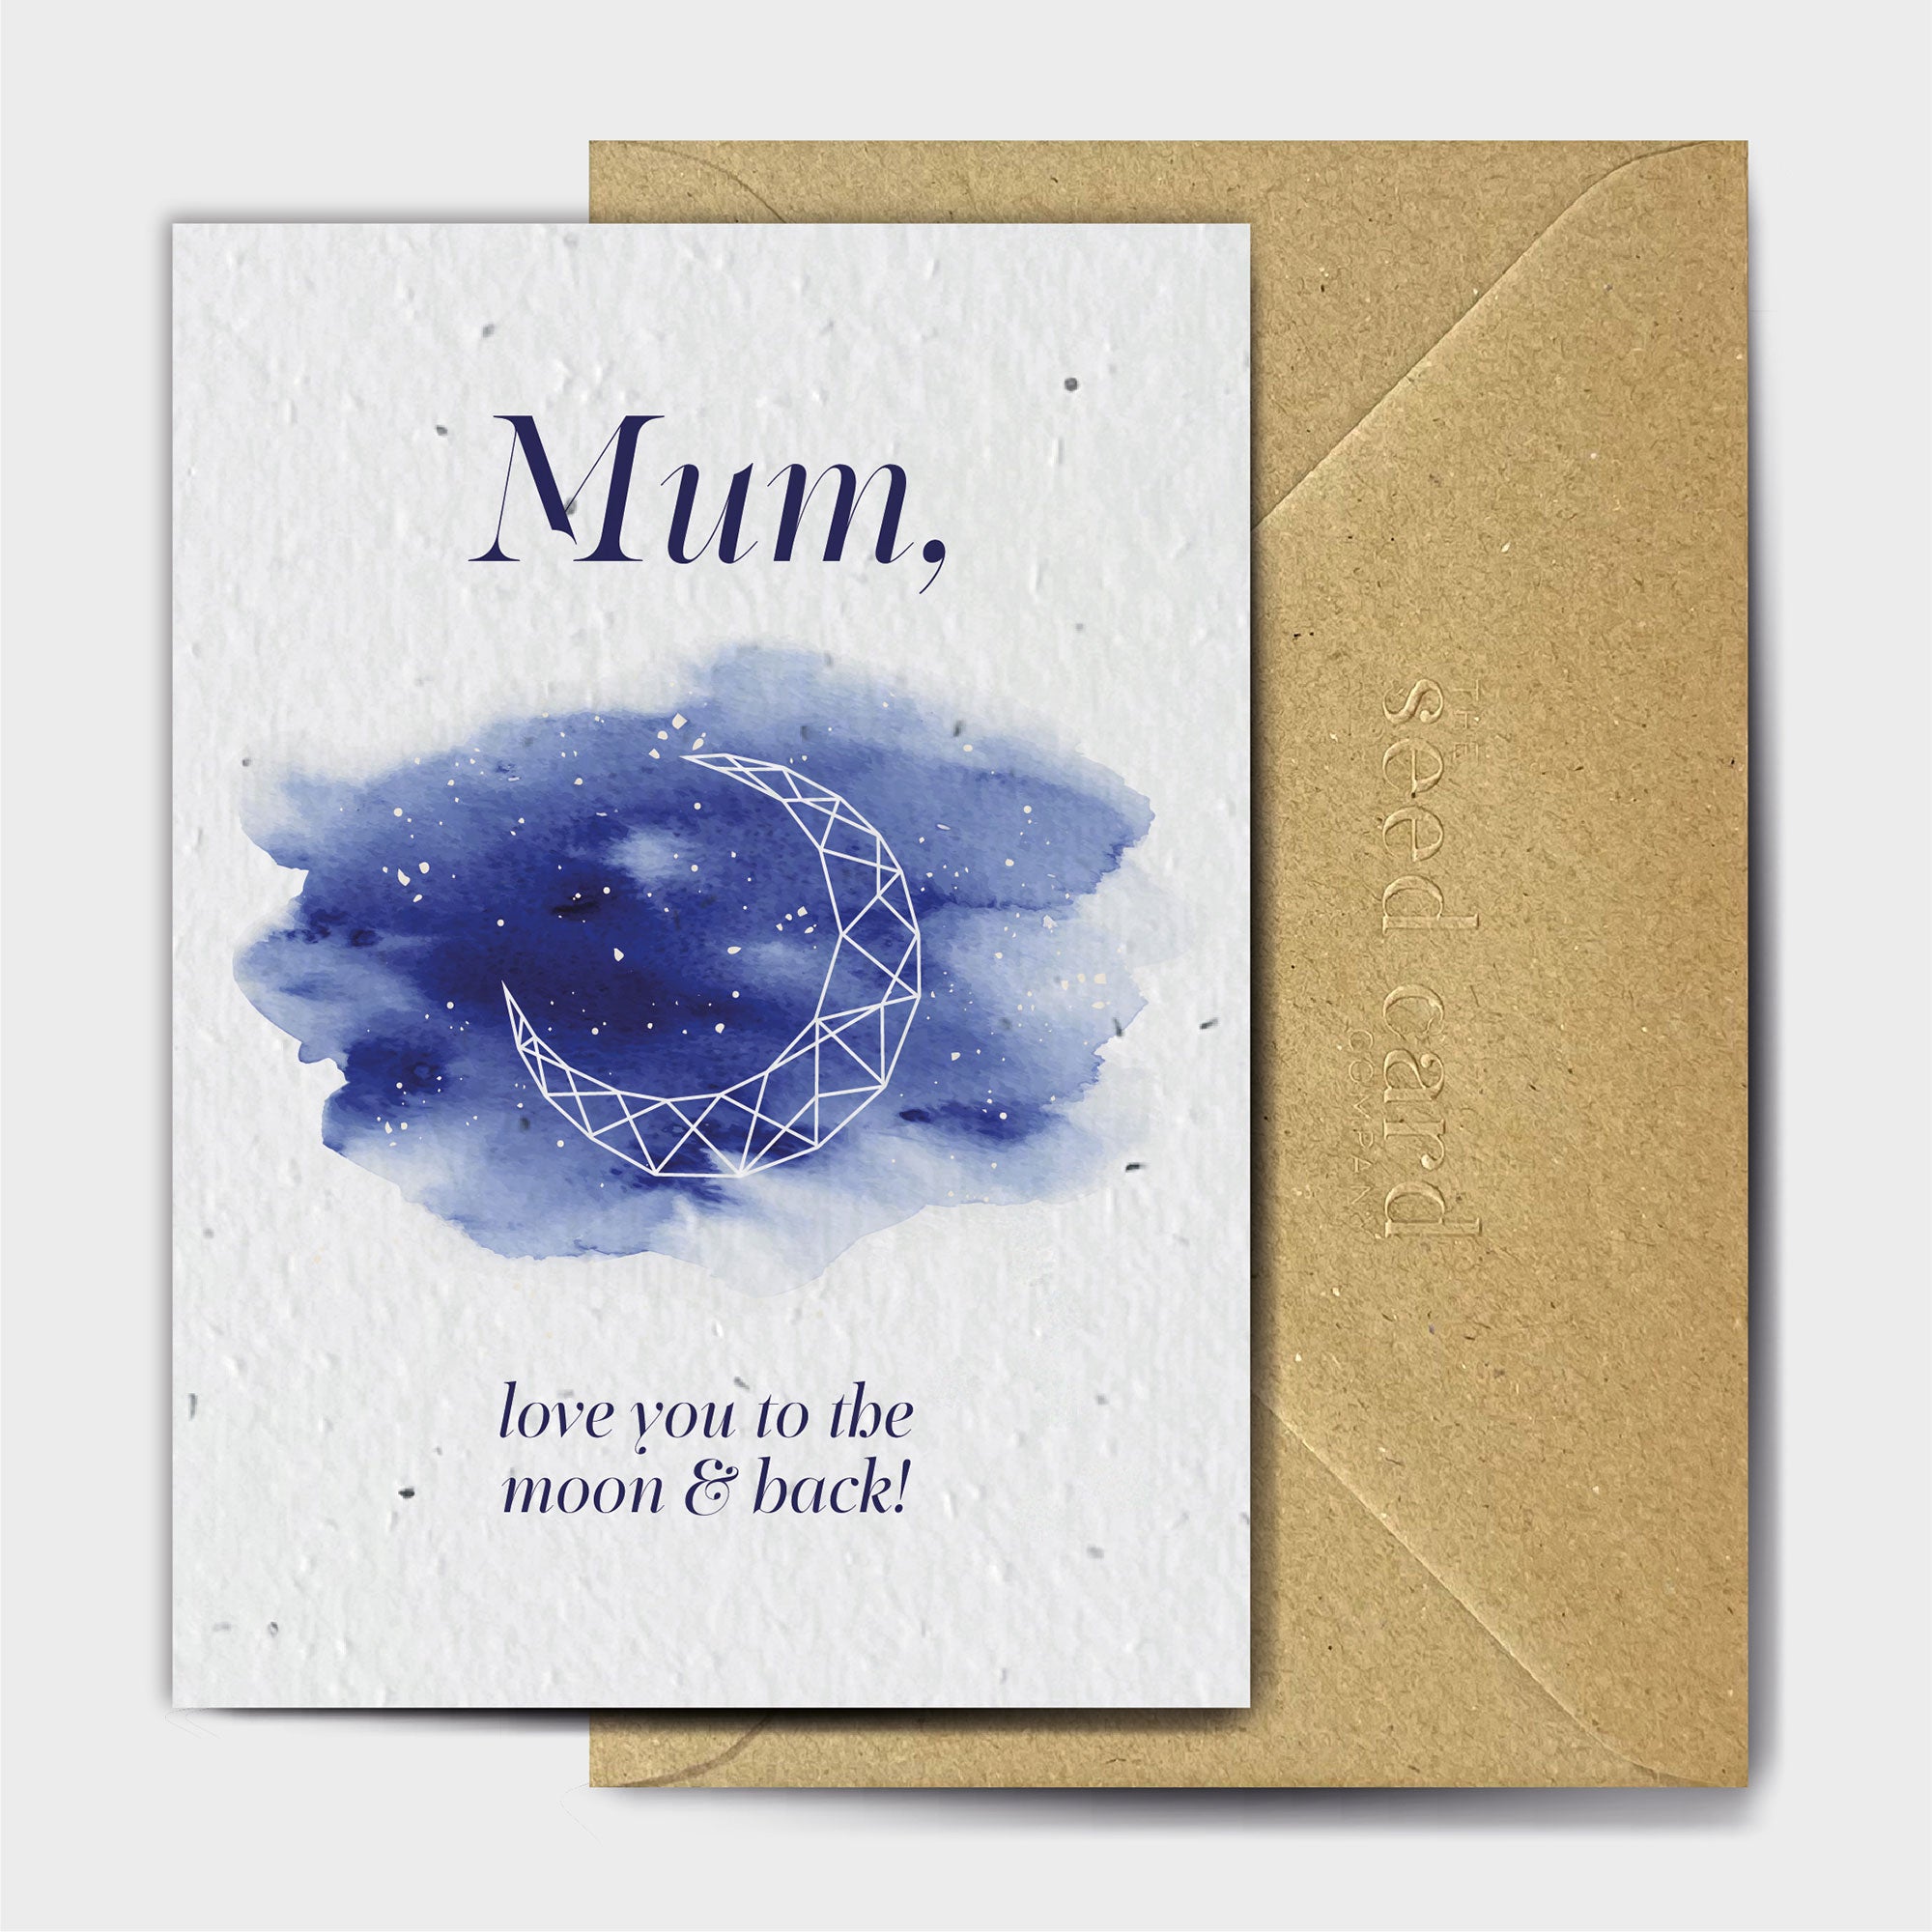 Shop online To The Moon & Back - 100% biodegradable seed-embedded cards Shop -The Seed Card Company